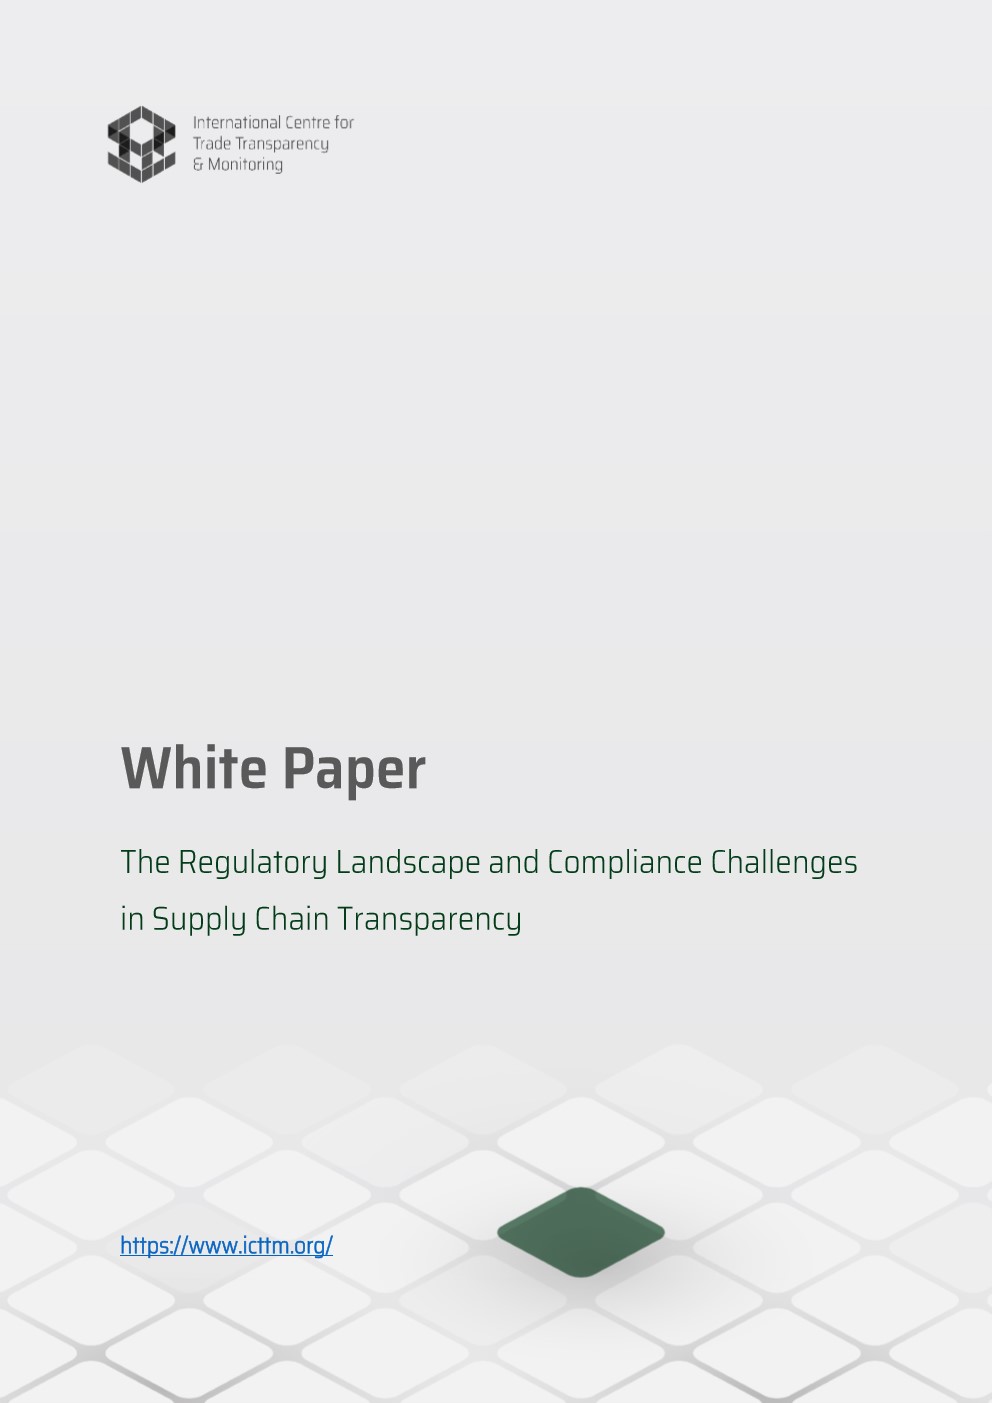 The Regulatory Landscape and Compliance Challenges in Supply Chain Transparency